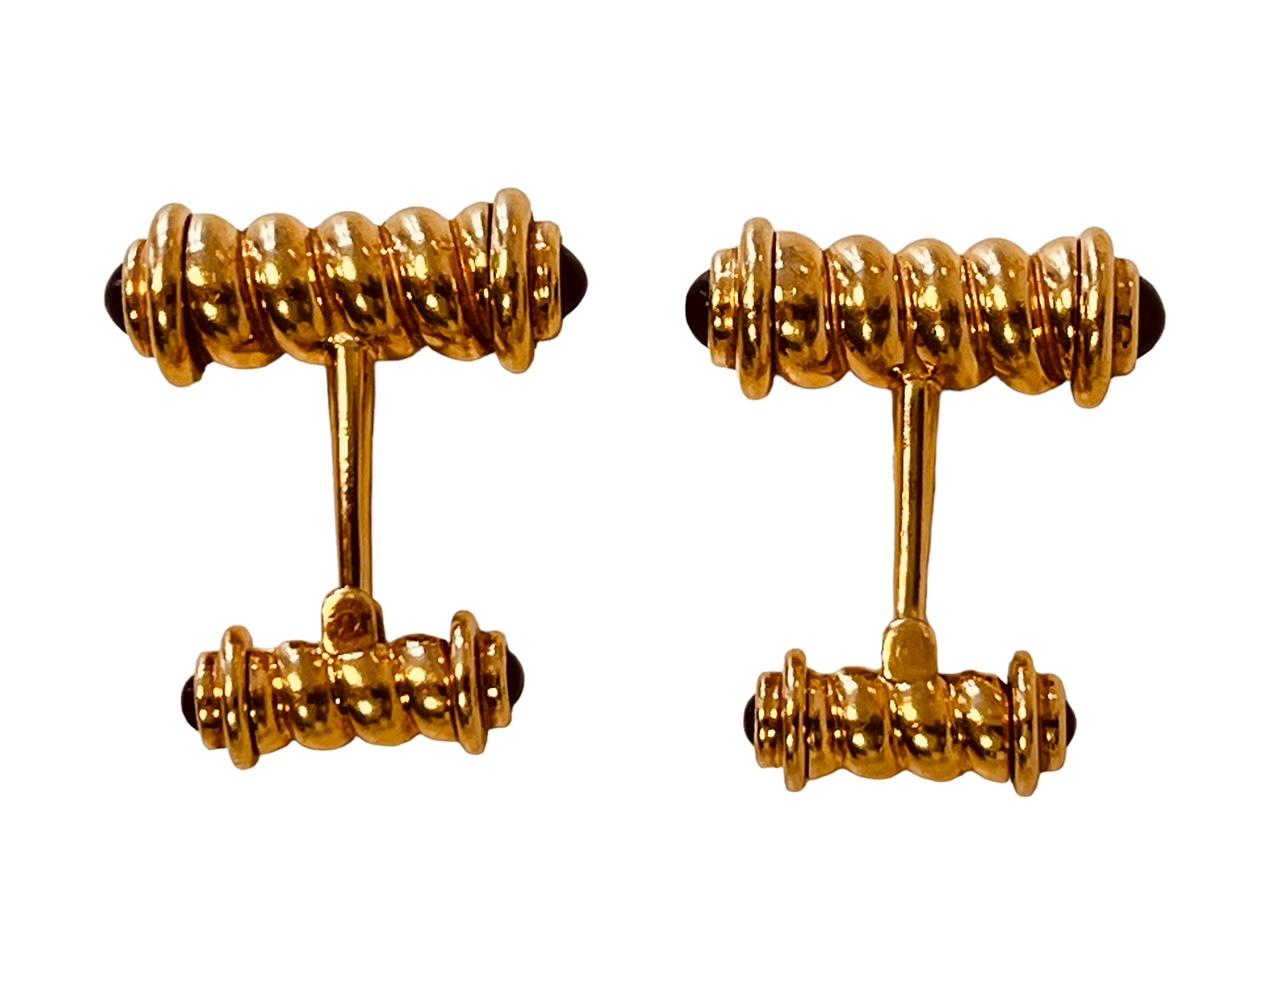 ASPREY. A 18ct pair of cufflinks. The rope twist bars mounted with cabochon sapphire terminals. Makers signature and hallmarks for 18ct. Weight: 24.8g. Price: 5,150£. Item is in very good condition without any damage. Return policy within 3 days is